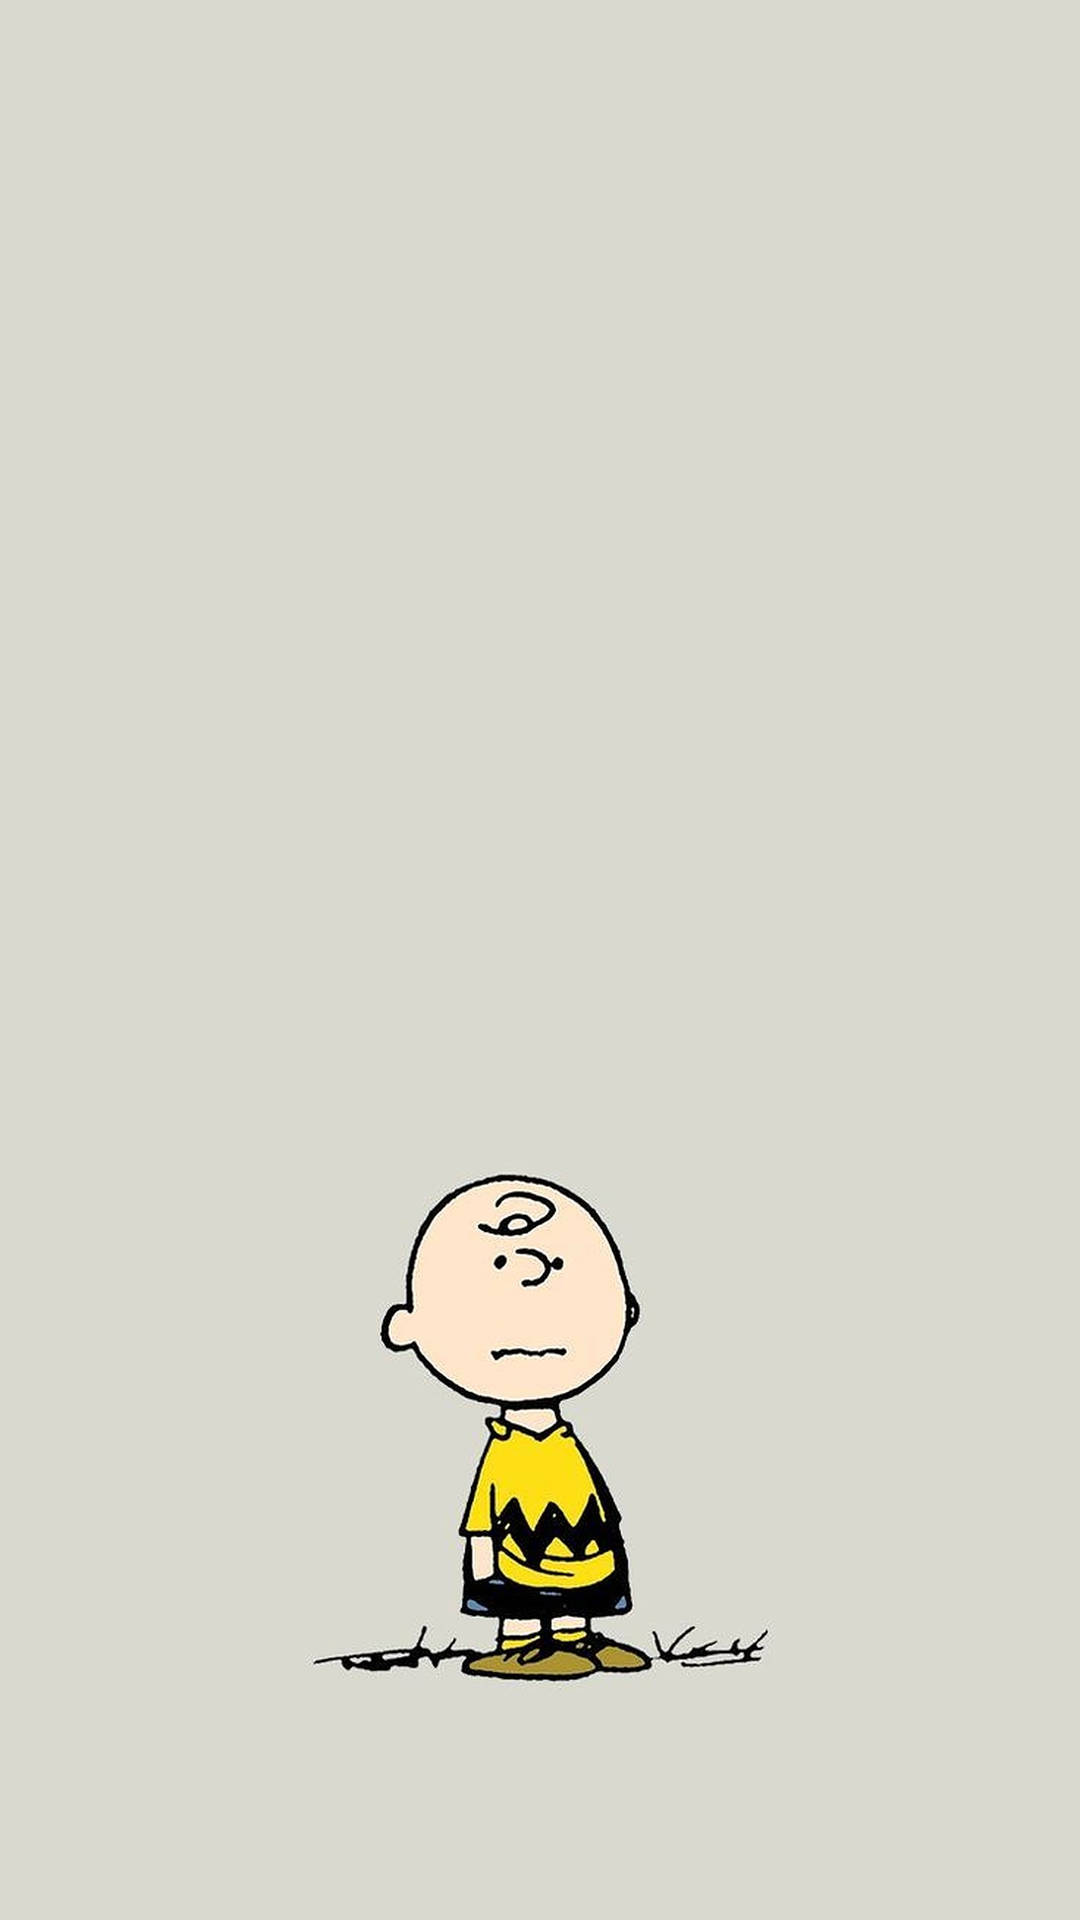 Download Lonely Charlie Brown Wallpaper